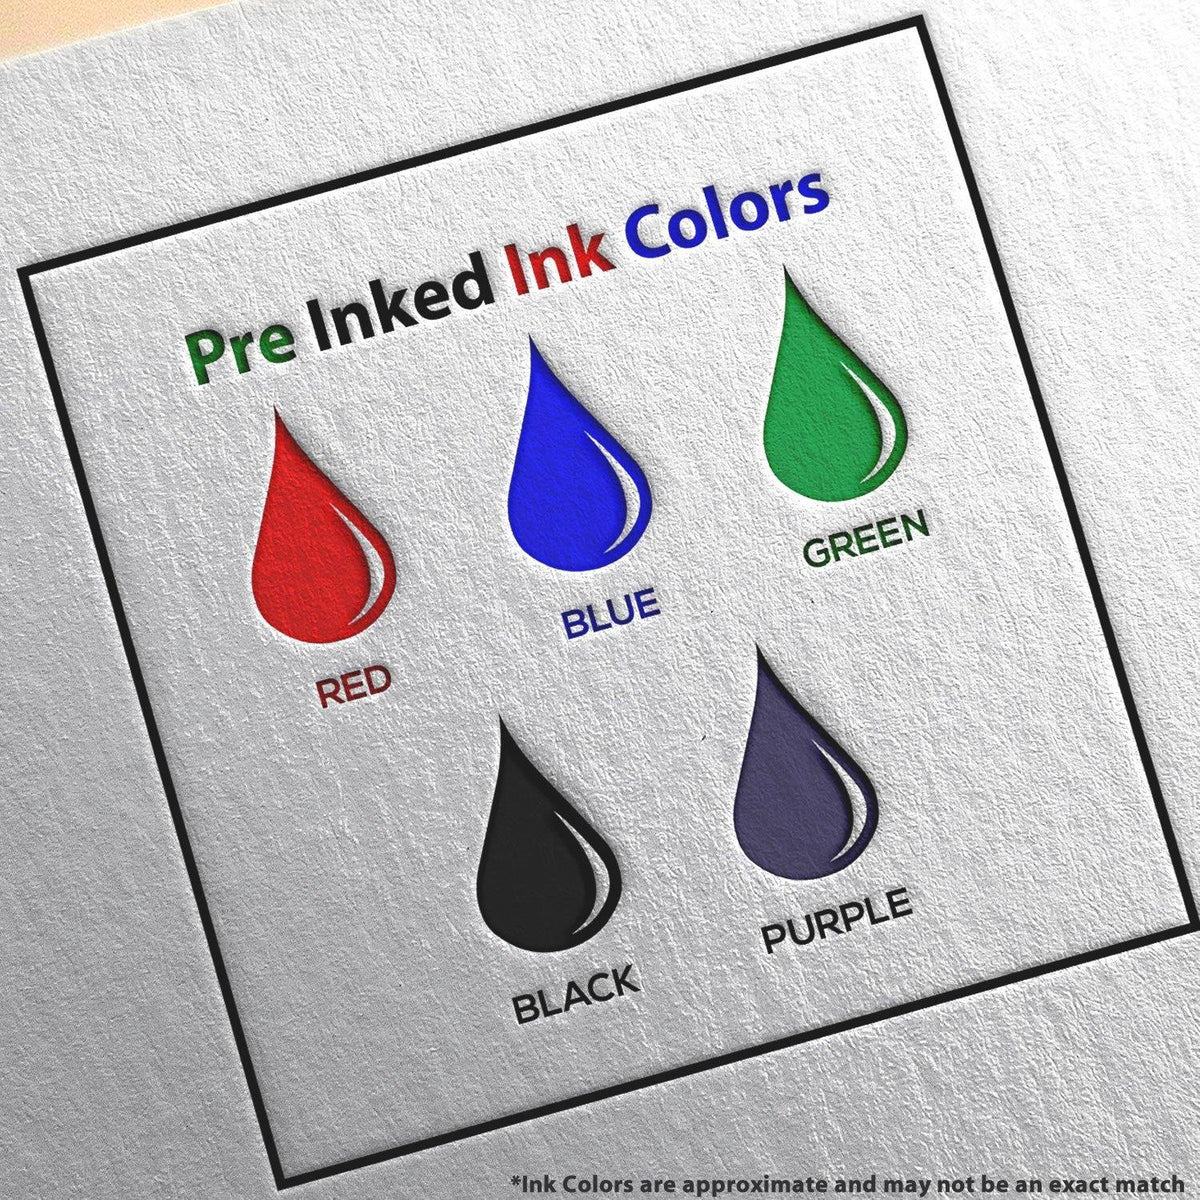 Large Pre-Inked Lets review this with Lamp Stamp Ink Color Options